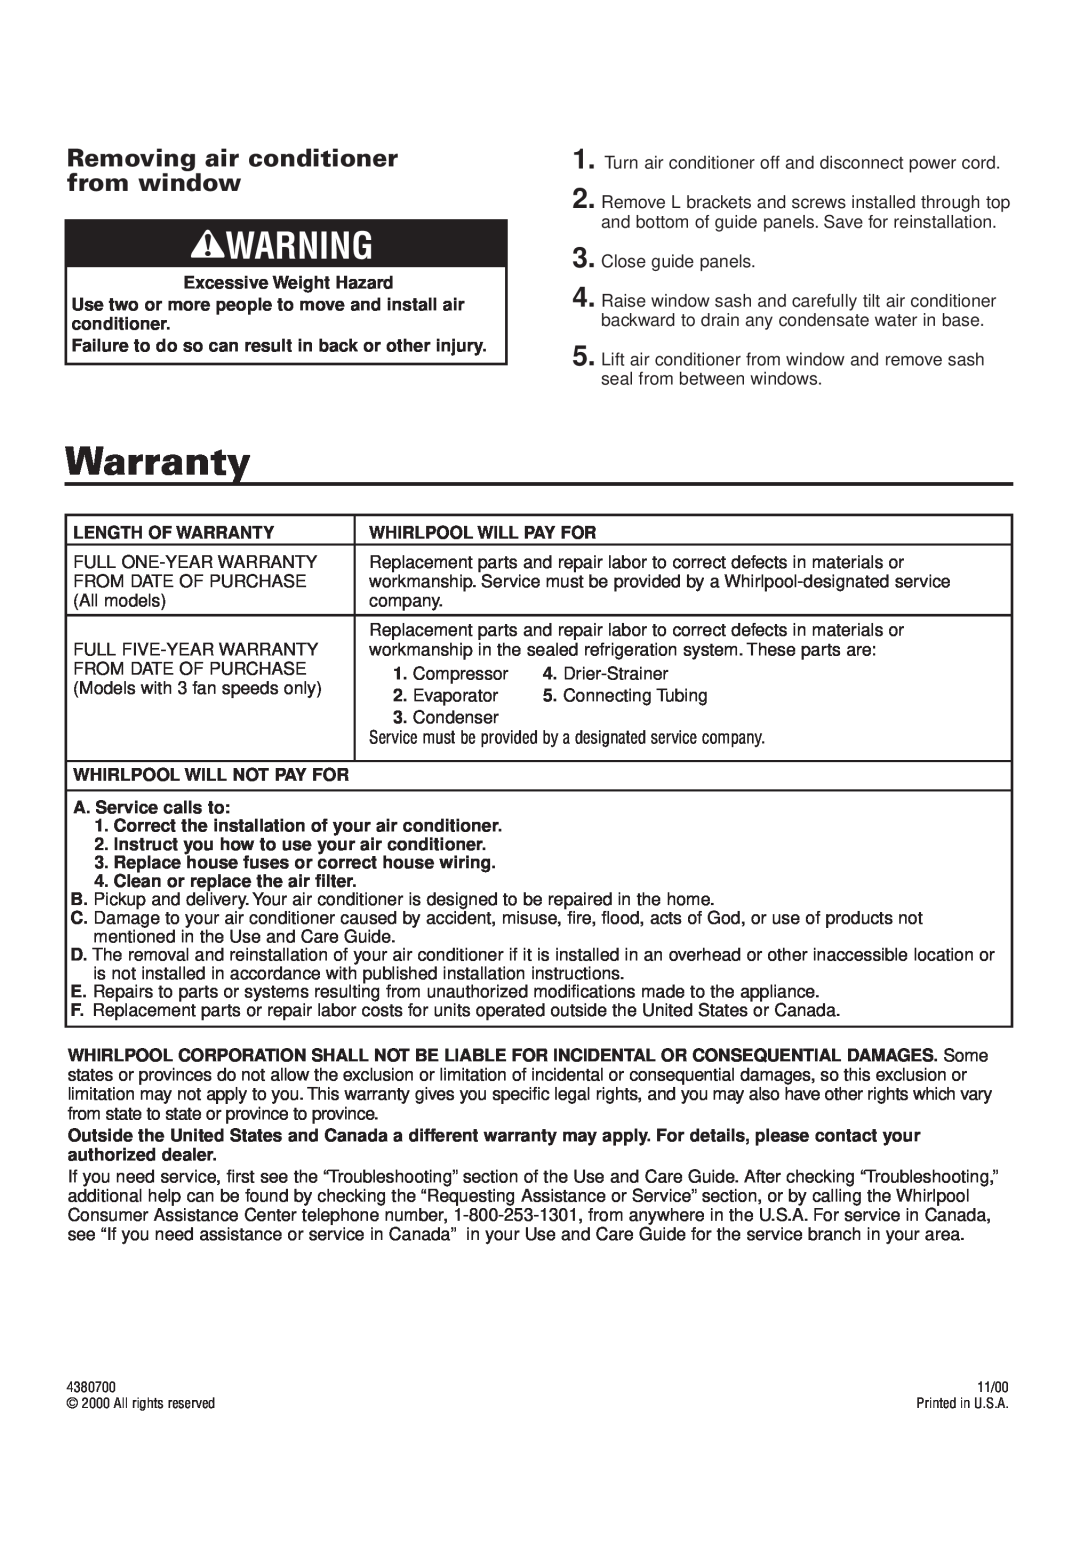 Whirlpool ACD052PK0 installation instructions Warranty, Removing air conditioner from window 